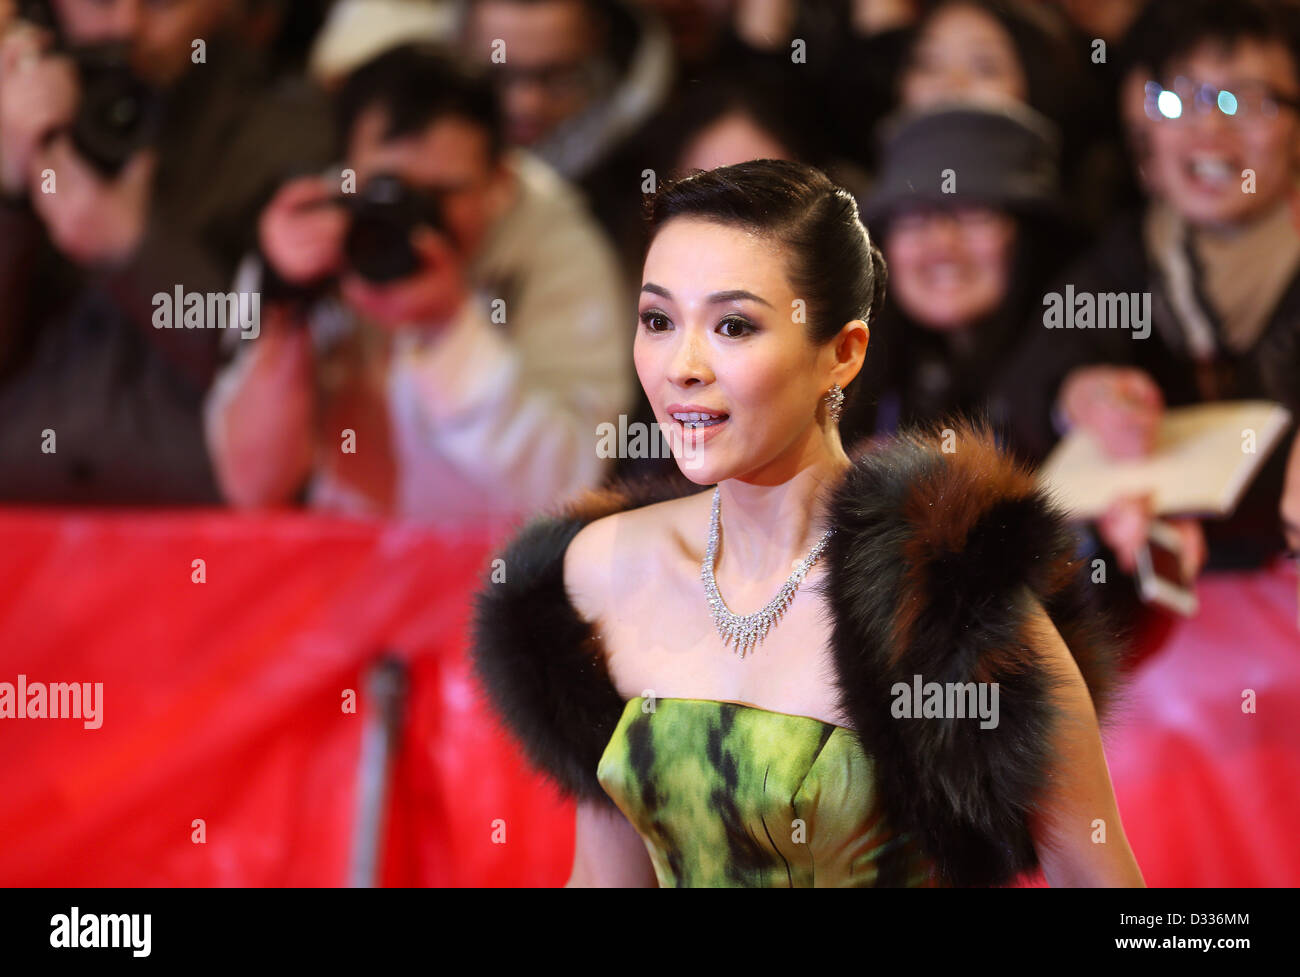 Chinese actress Zhang Ziyi arrives for the premiere of the movie 'The Grandmaster' ('Yi dai zong shi') during the 63rd annual Berlin International Film Festival, in Berlin, Germany, 07 February 2013. The movie has been selected as the opening film for the Berlinale and is running in the offical section out of competion. Photo: Hannibal dpa Stock Photo